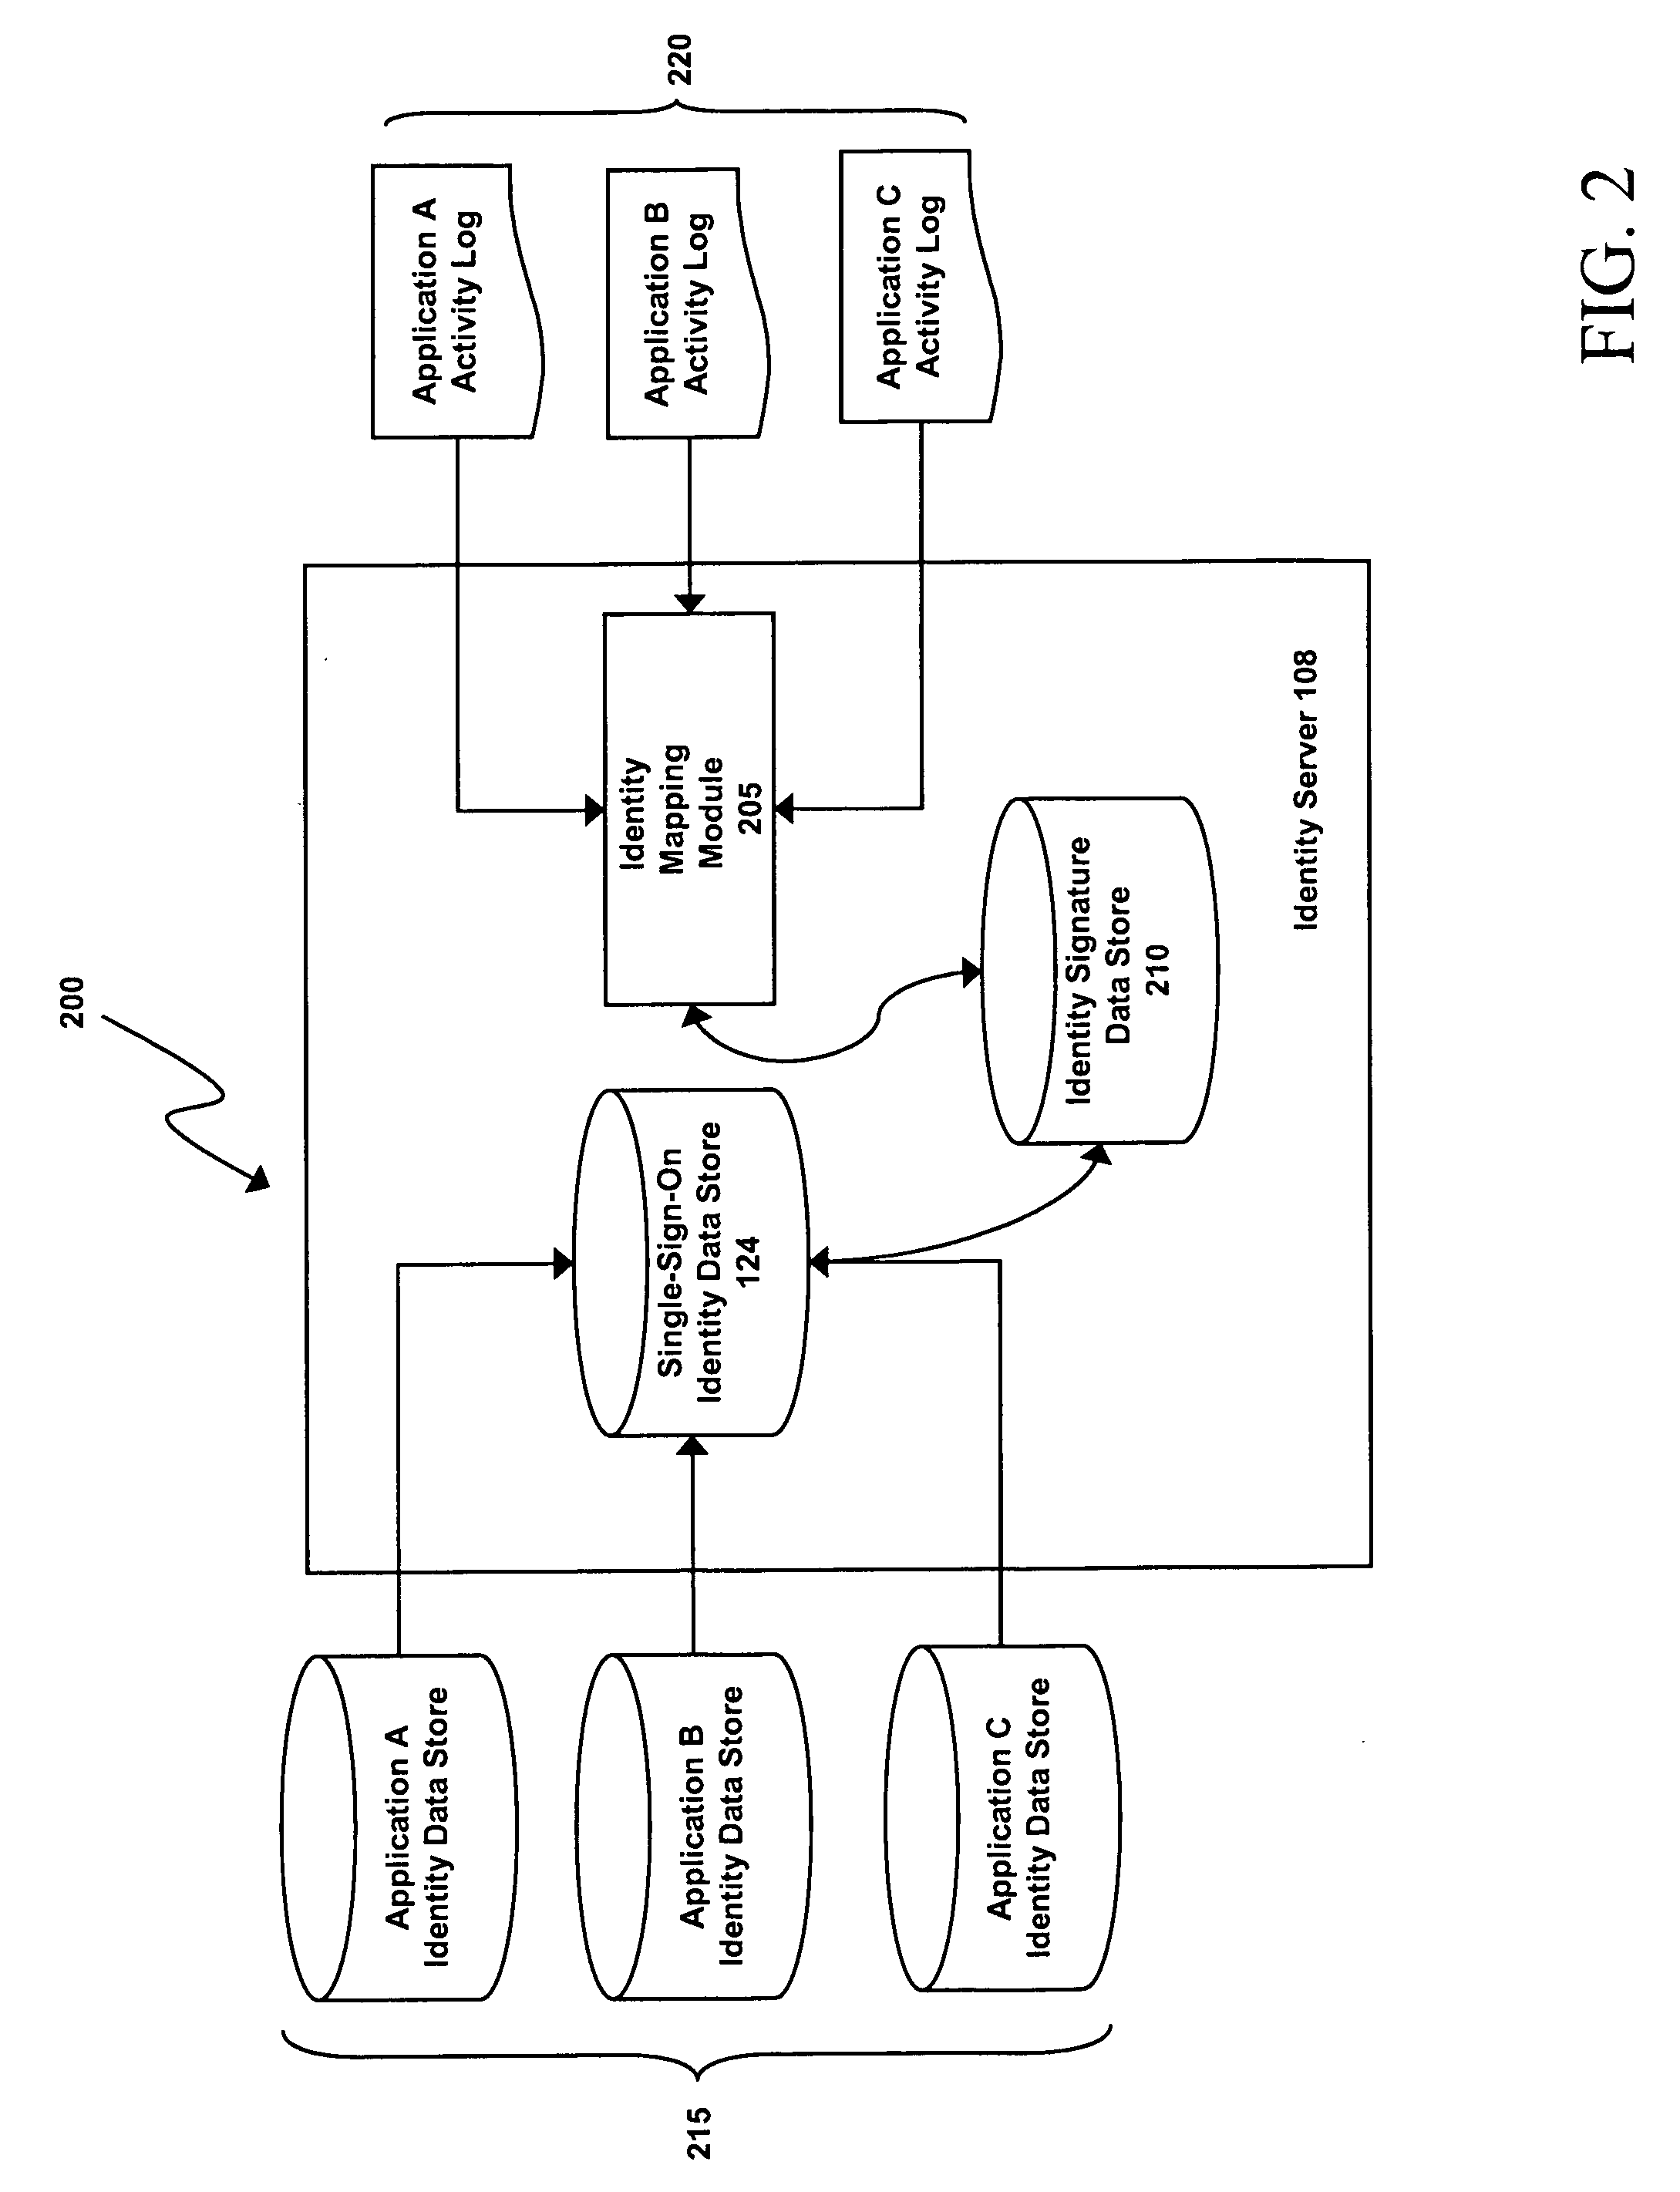 System and method for identity consolidation